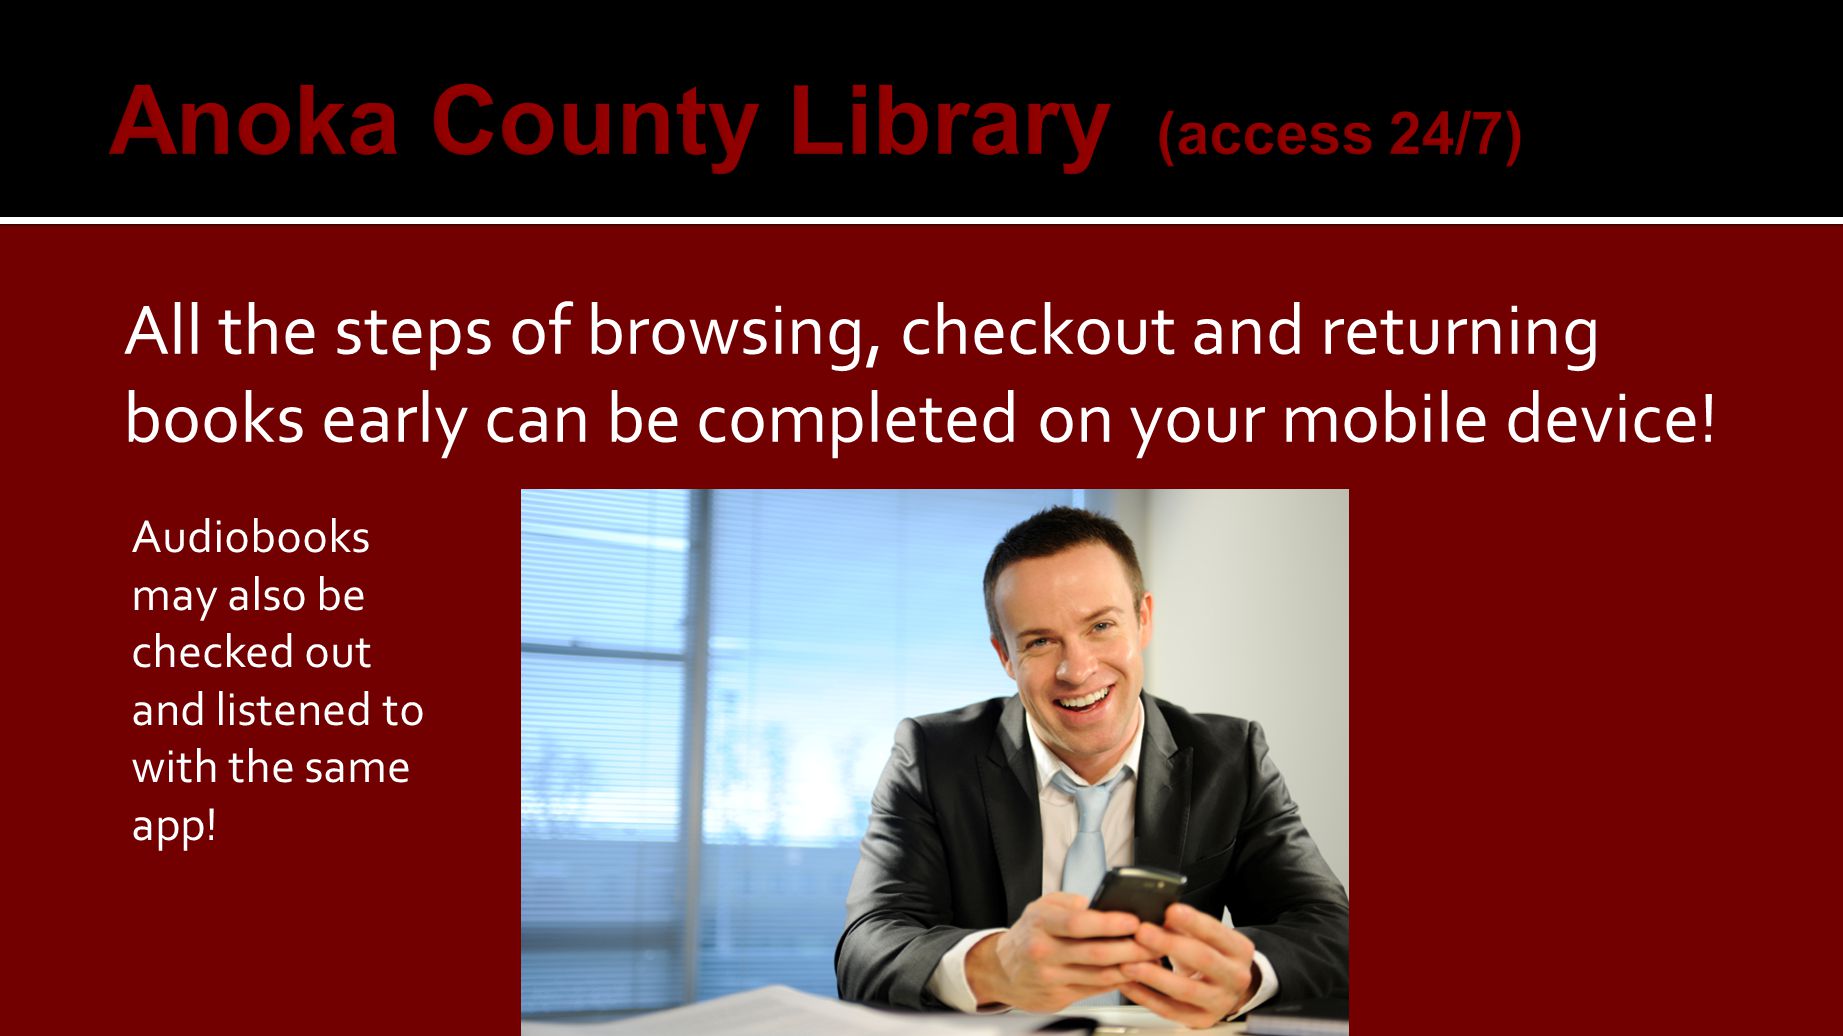 All the steps of browsing, checkout and returning books early can be completed on your mobile device.